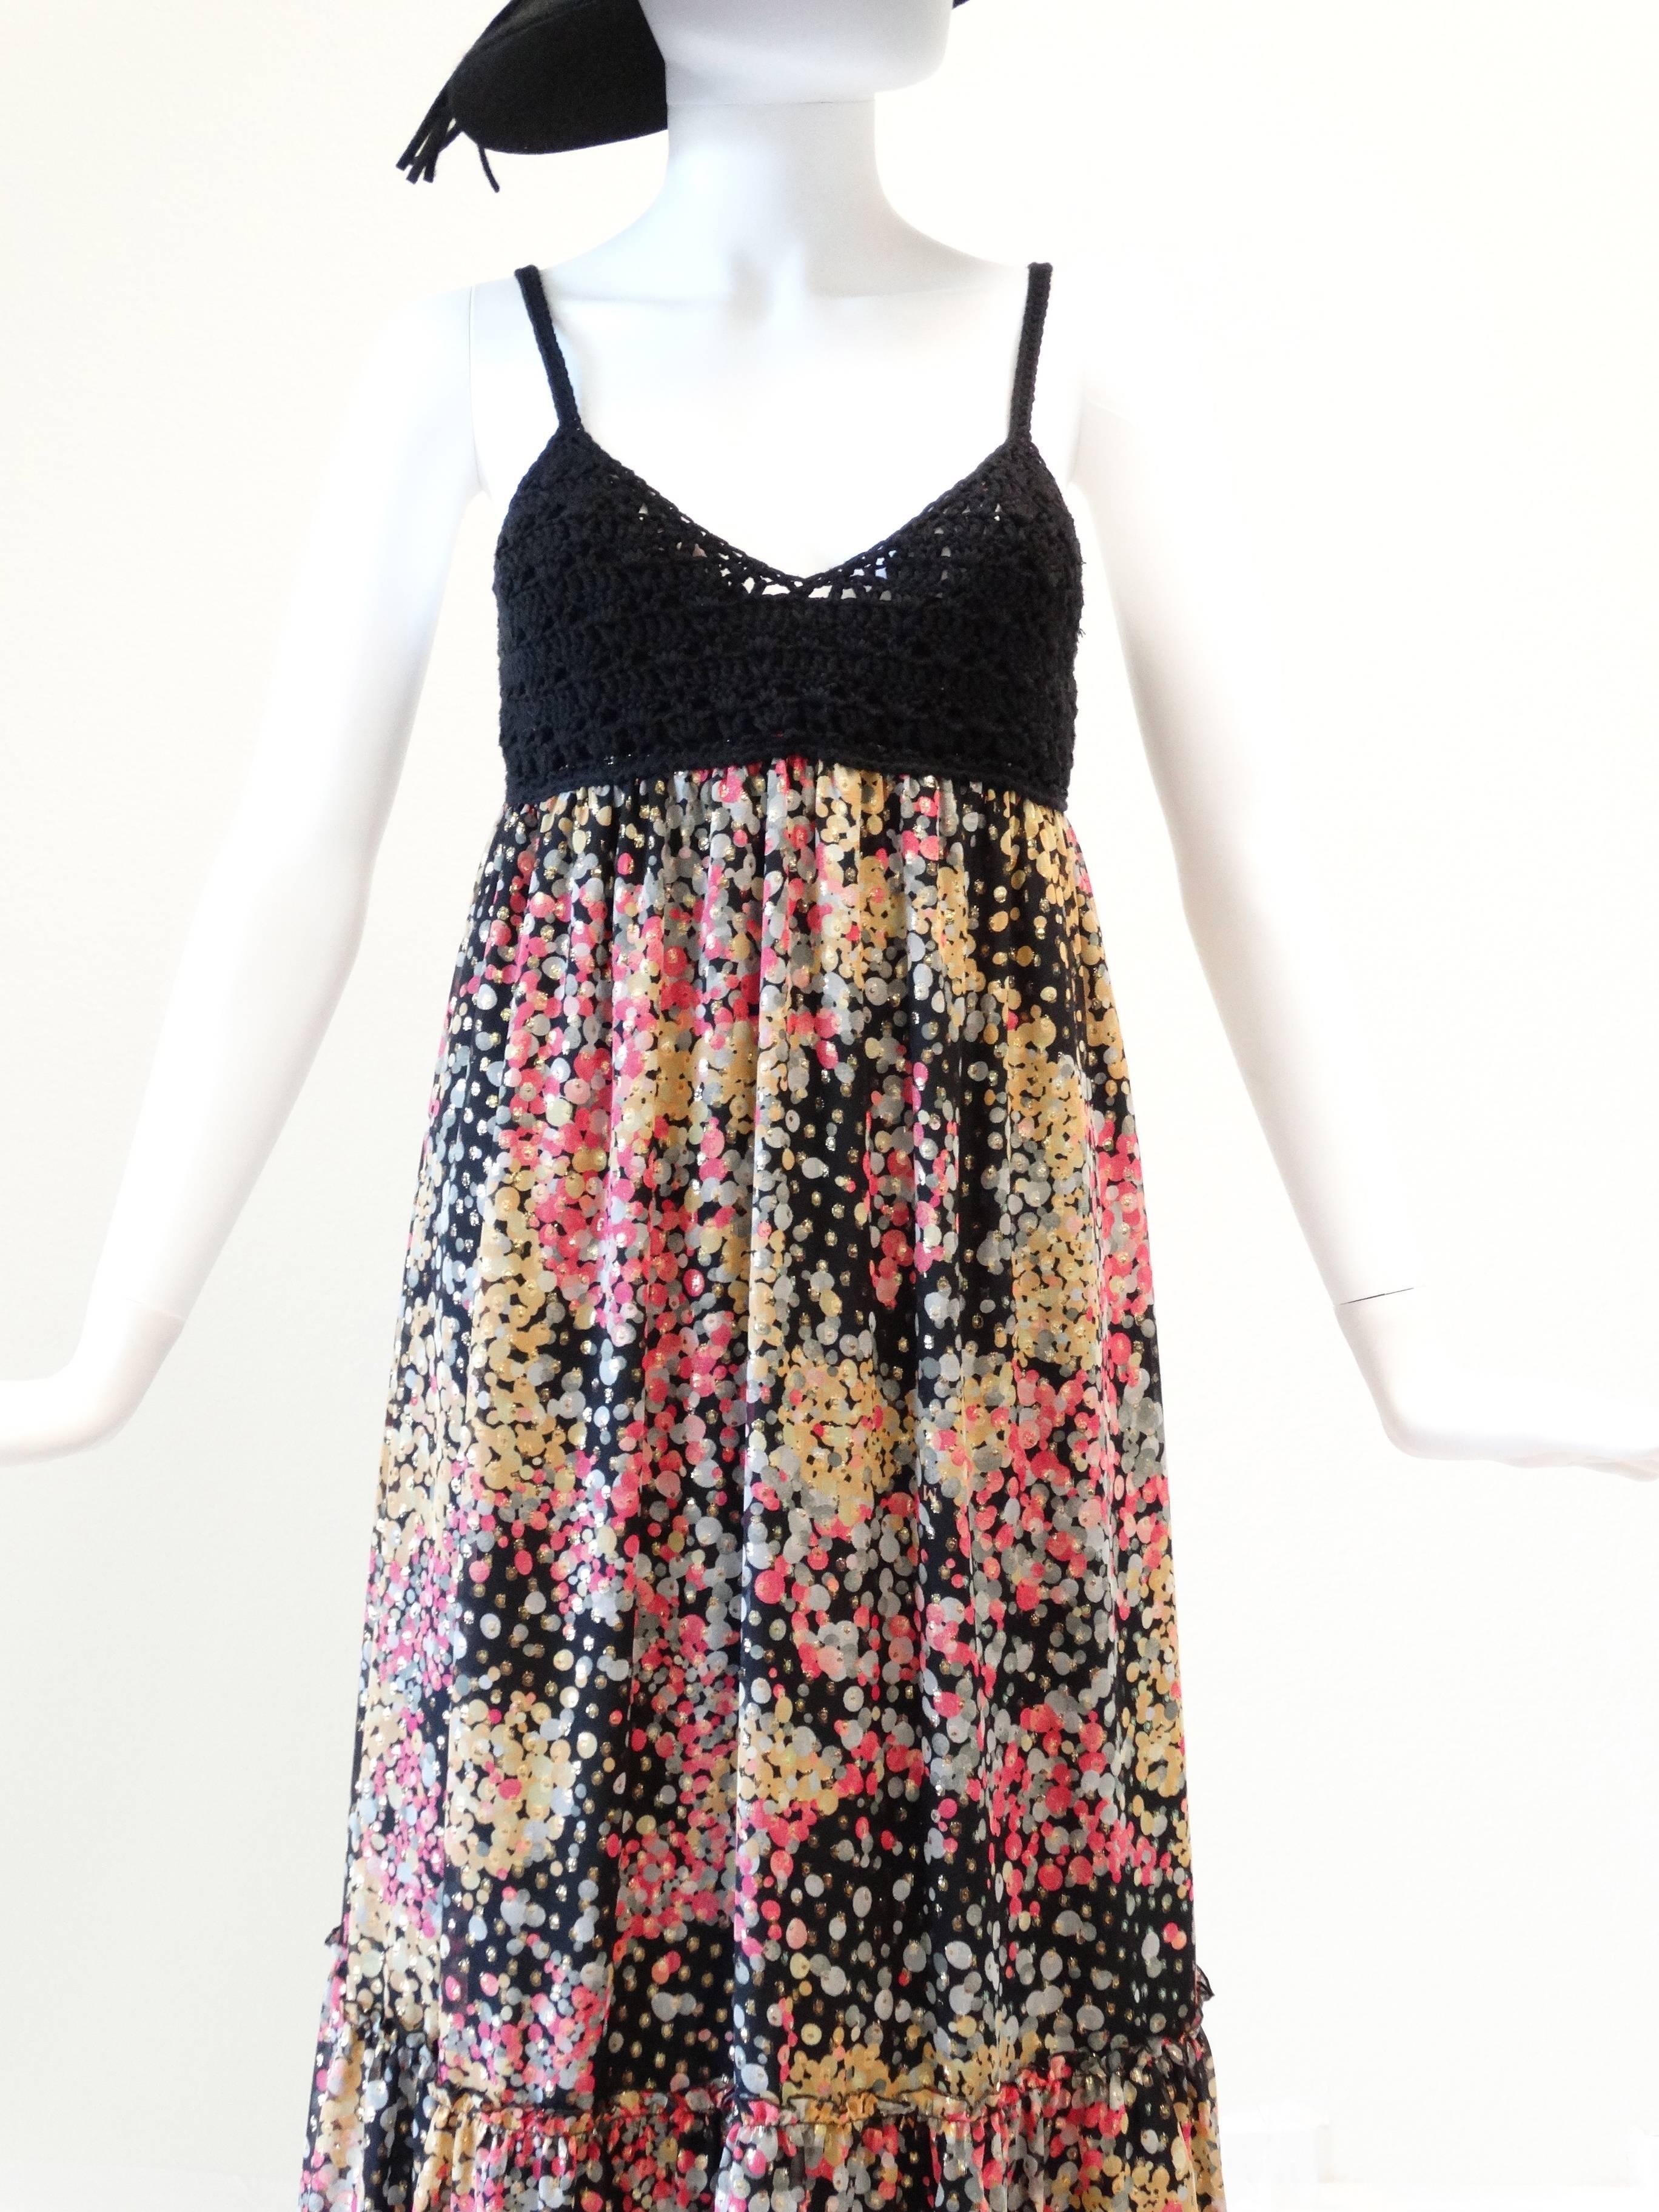 If you love Missoni this maxi is for you! Beautiful crochet top that ends under the bust. Maxi is empire waist with a beautiful confetti print with gold lame through out. Lined in silk... Marked size small

Measurements:

Bust 32-34
Waist 27
